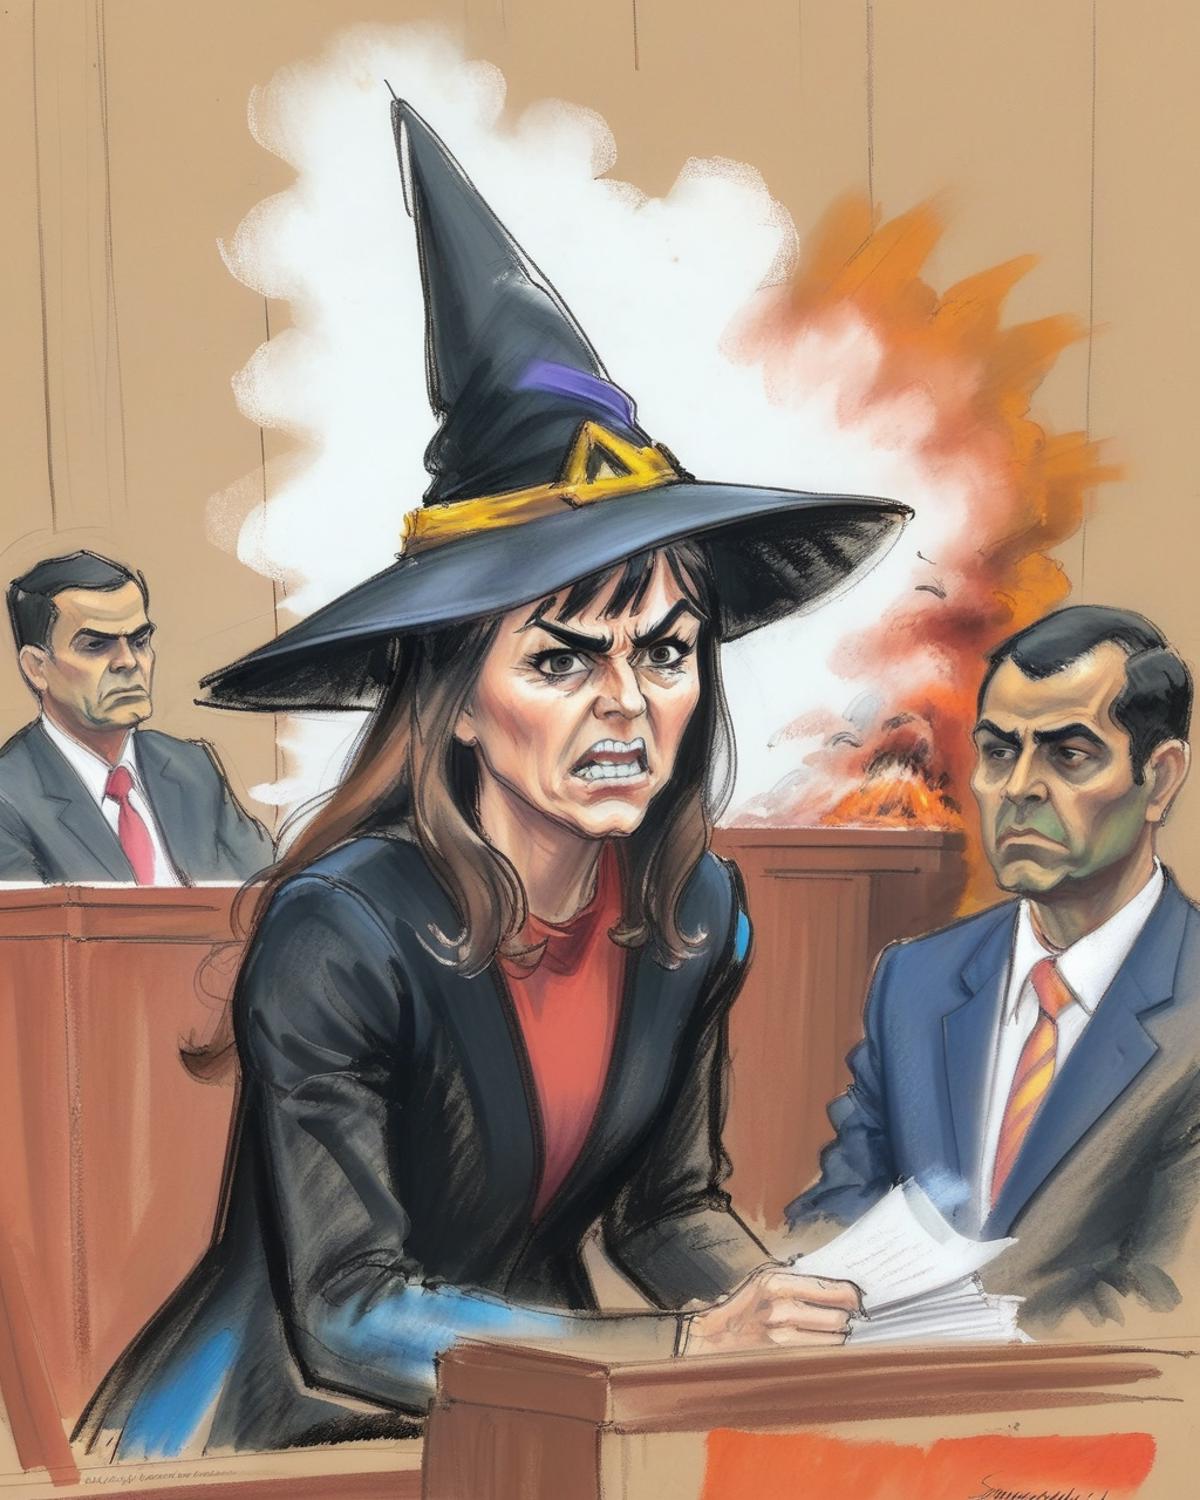 Courtroom Sketch Style image by burnera679889